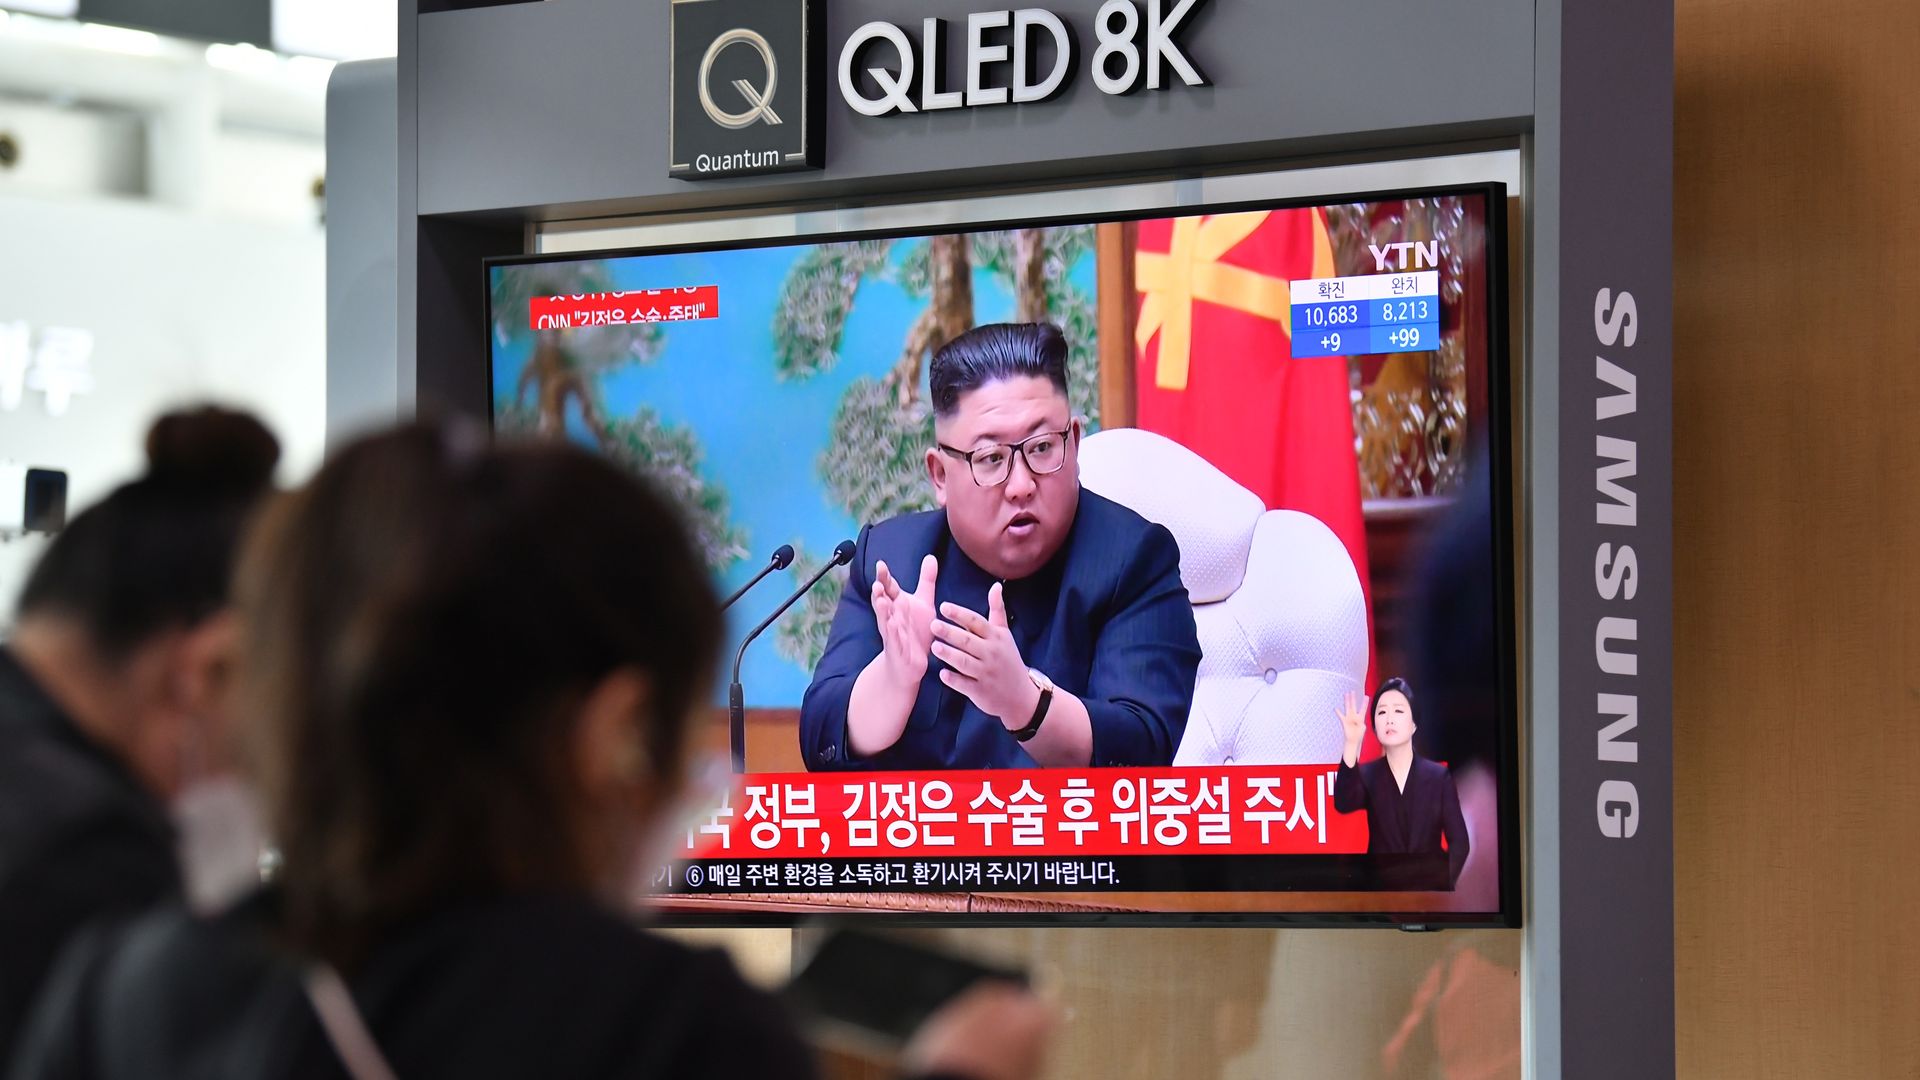 In this image, Kim Jong un is displayed on a TV screen 